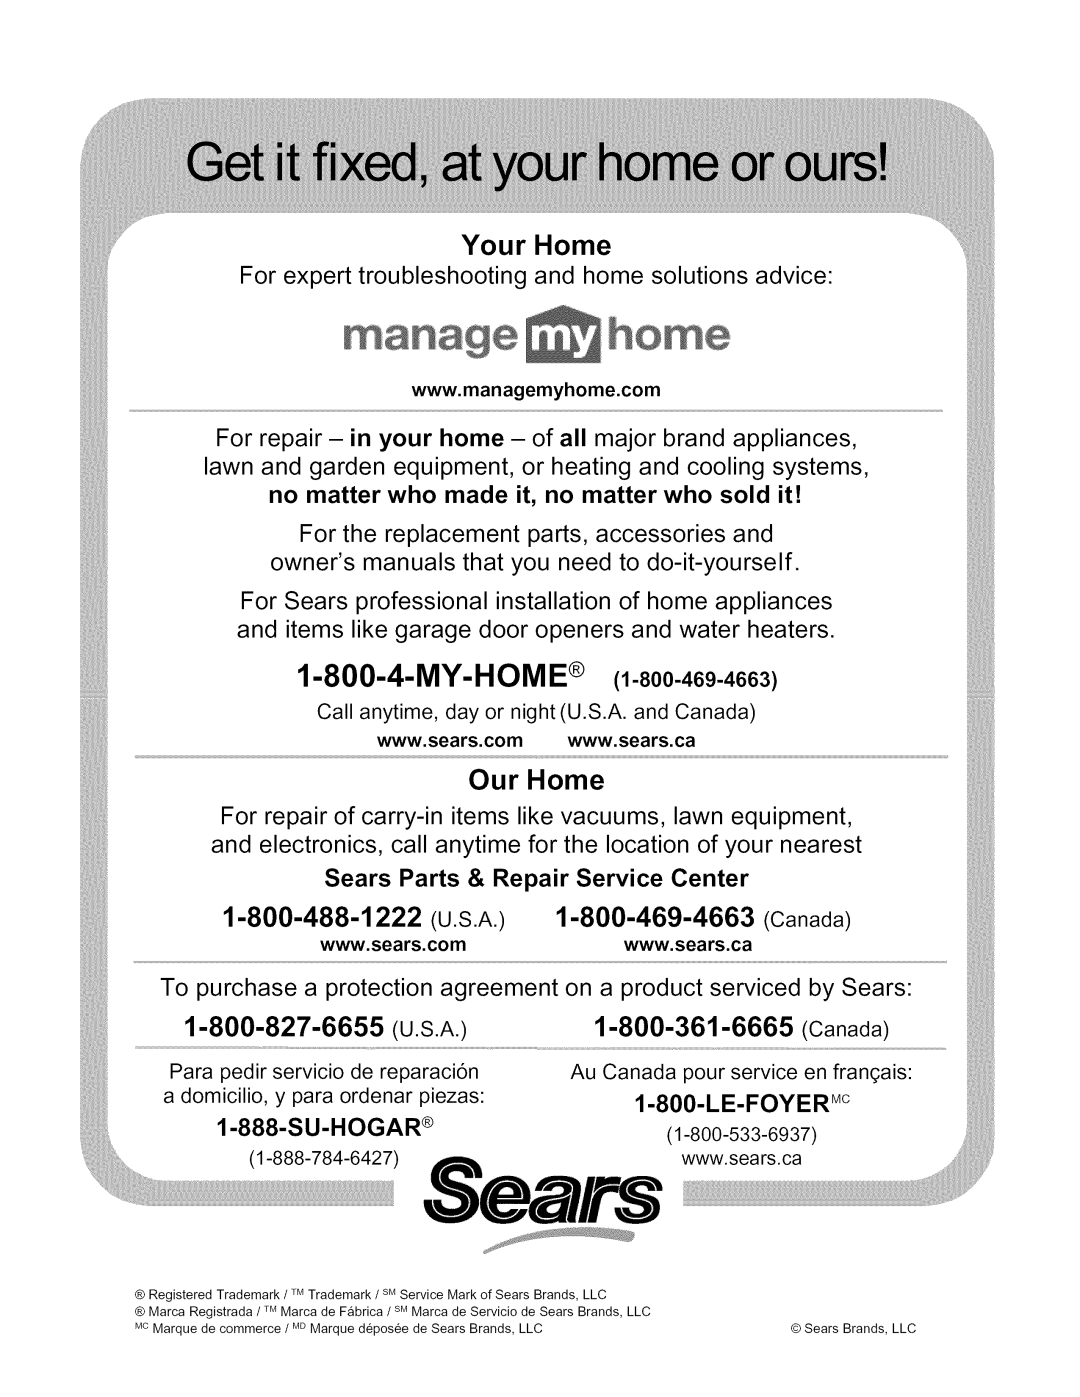 Kenmore 790.4019 manual Your Home, Our Home, 1-800-488-1222 U.S.A. 1-800-469-4663 Canada, 1-800-827-6655 U.S.A, My-Home 